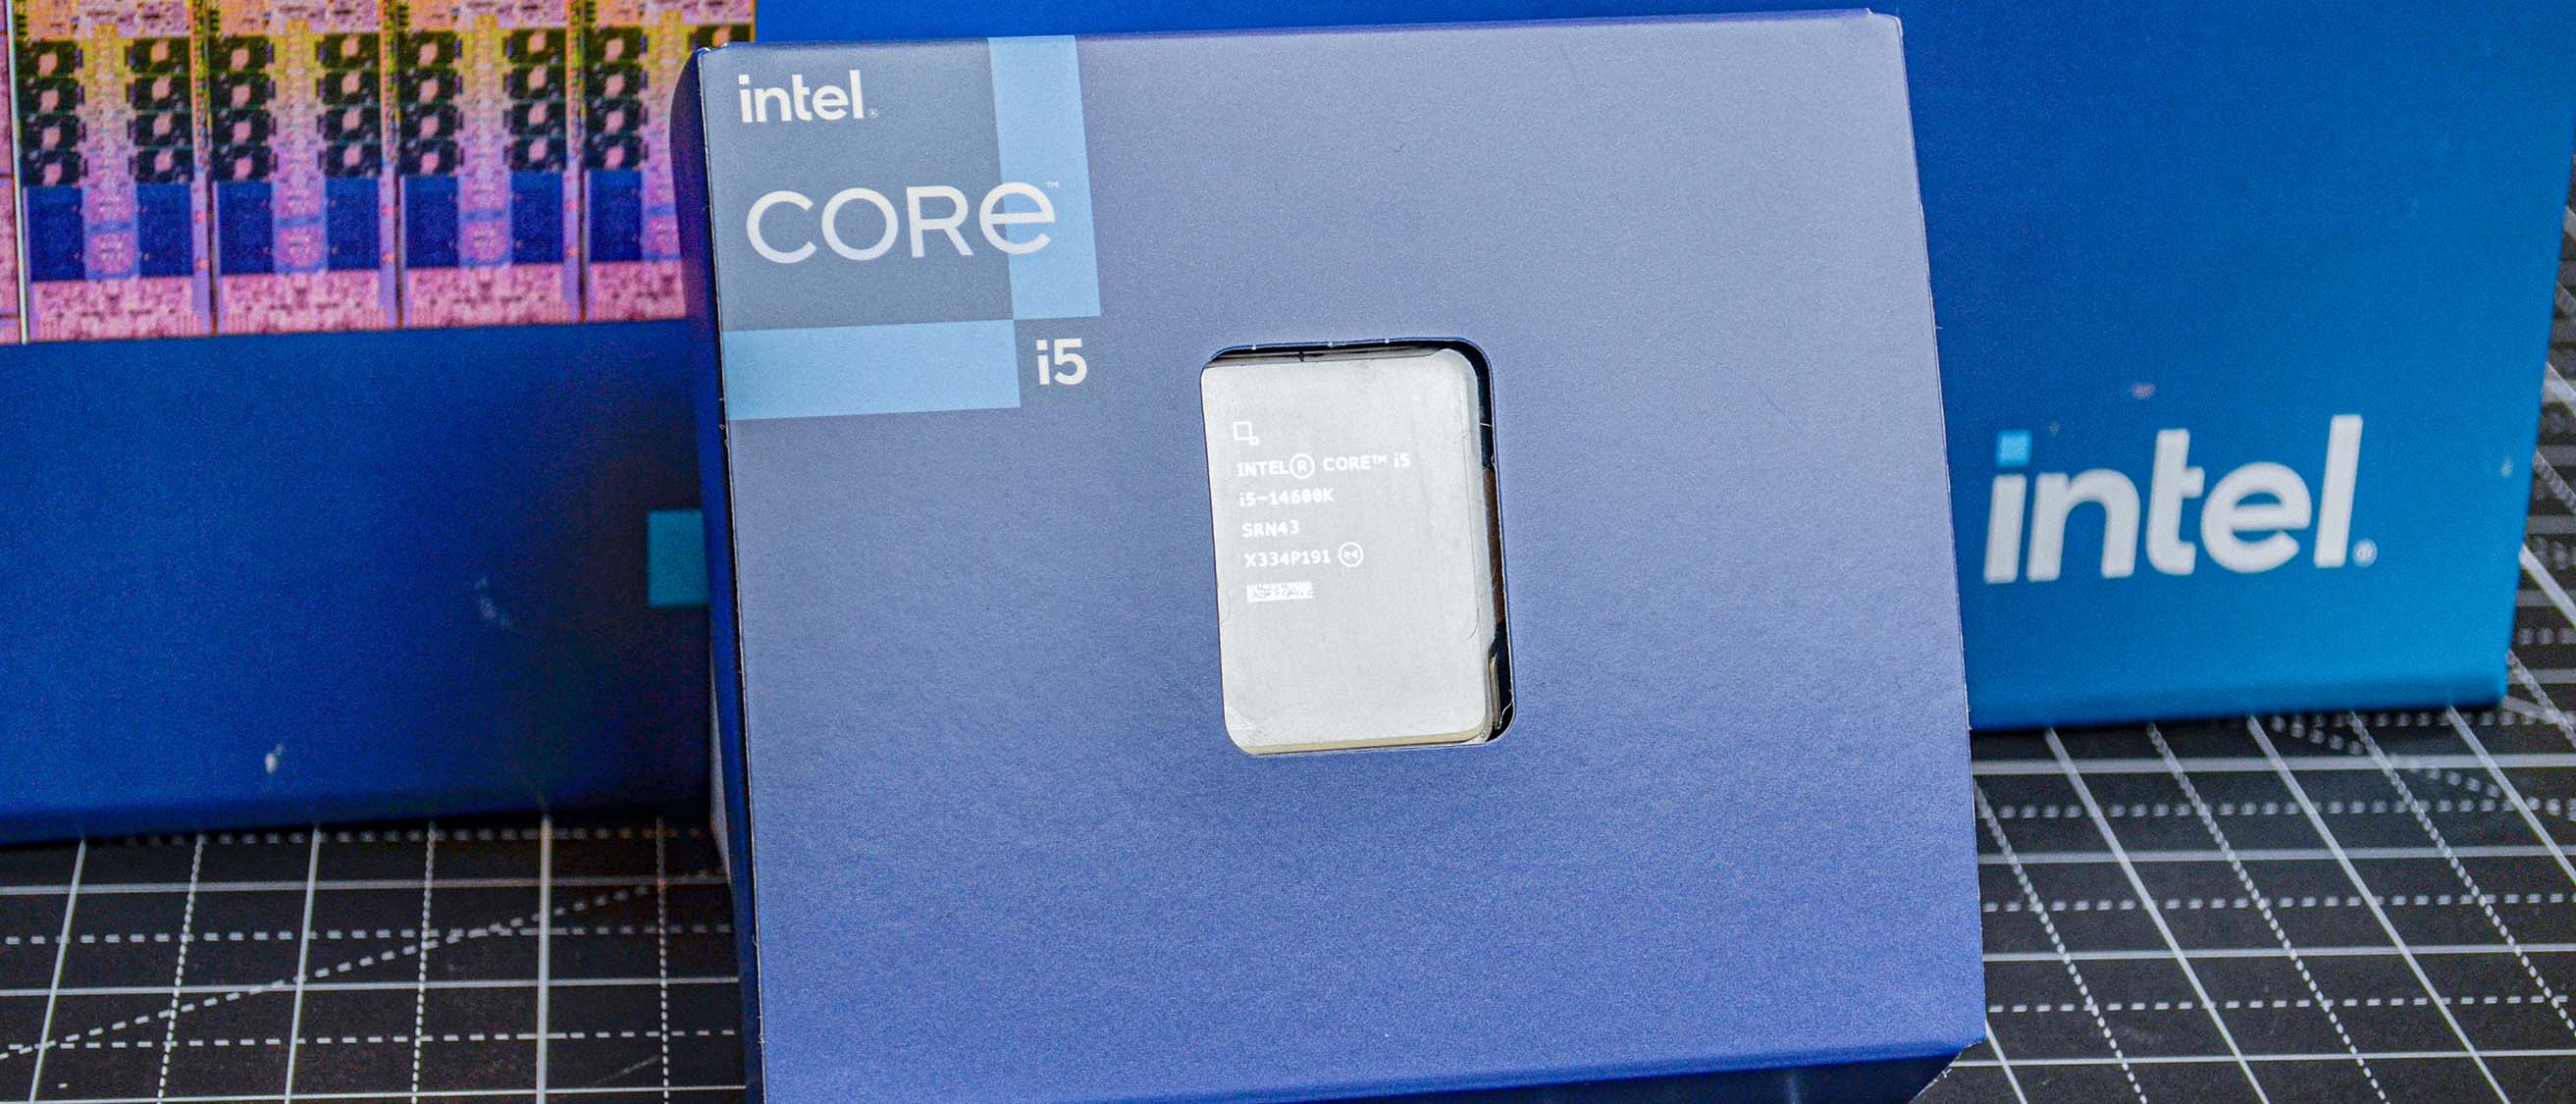 Intel Core i5-14600K Review: An Iterative Upgrade, But a Good Mid-Range CPU  - MySmartPrice